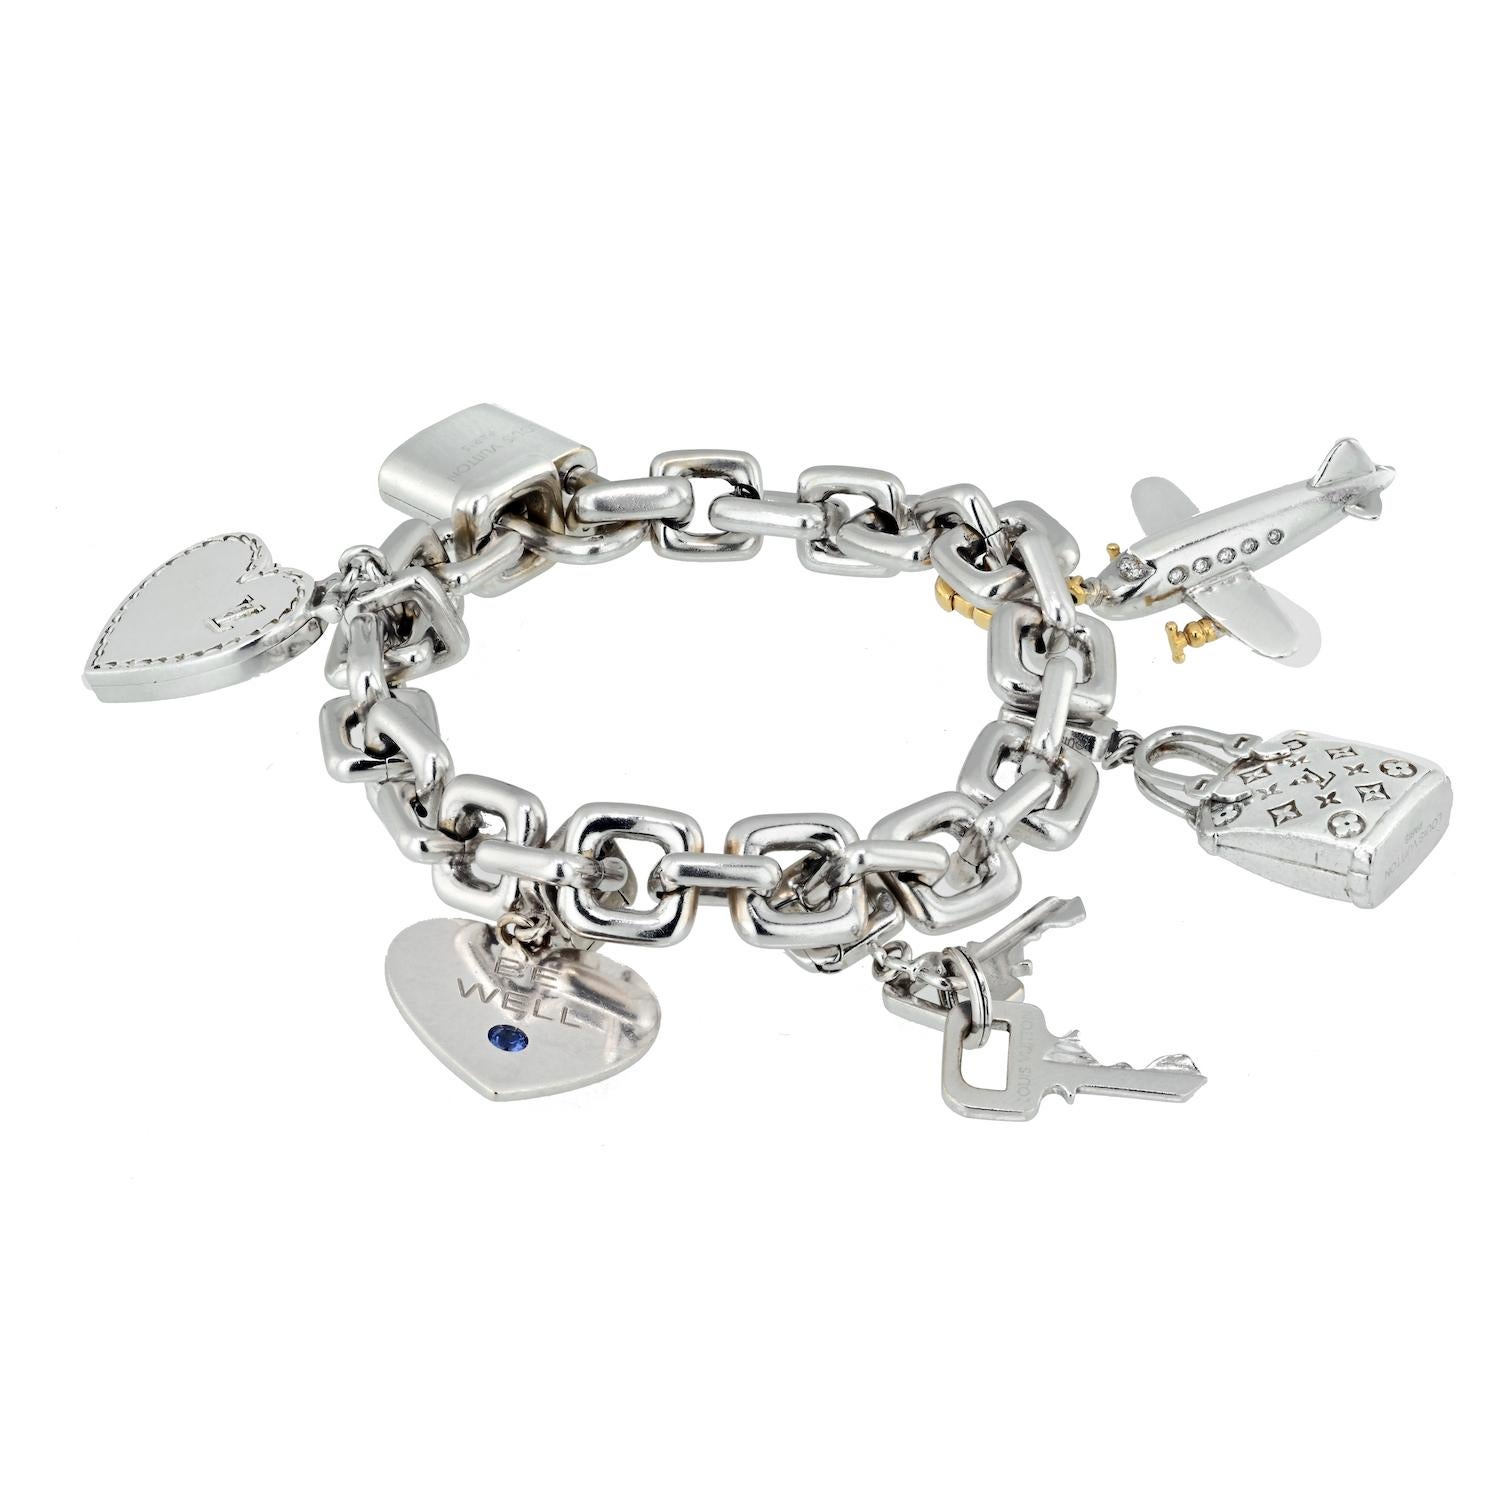 Indulge in the luxury of Louis Vuitton with this exquisite 18K white gold six-charm link bracelet. This meticulously crafted bracelet features a collection of charming symbols that reflect the iconic style of Louis Vuitton.

The bracelet showcases